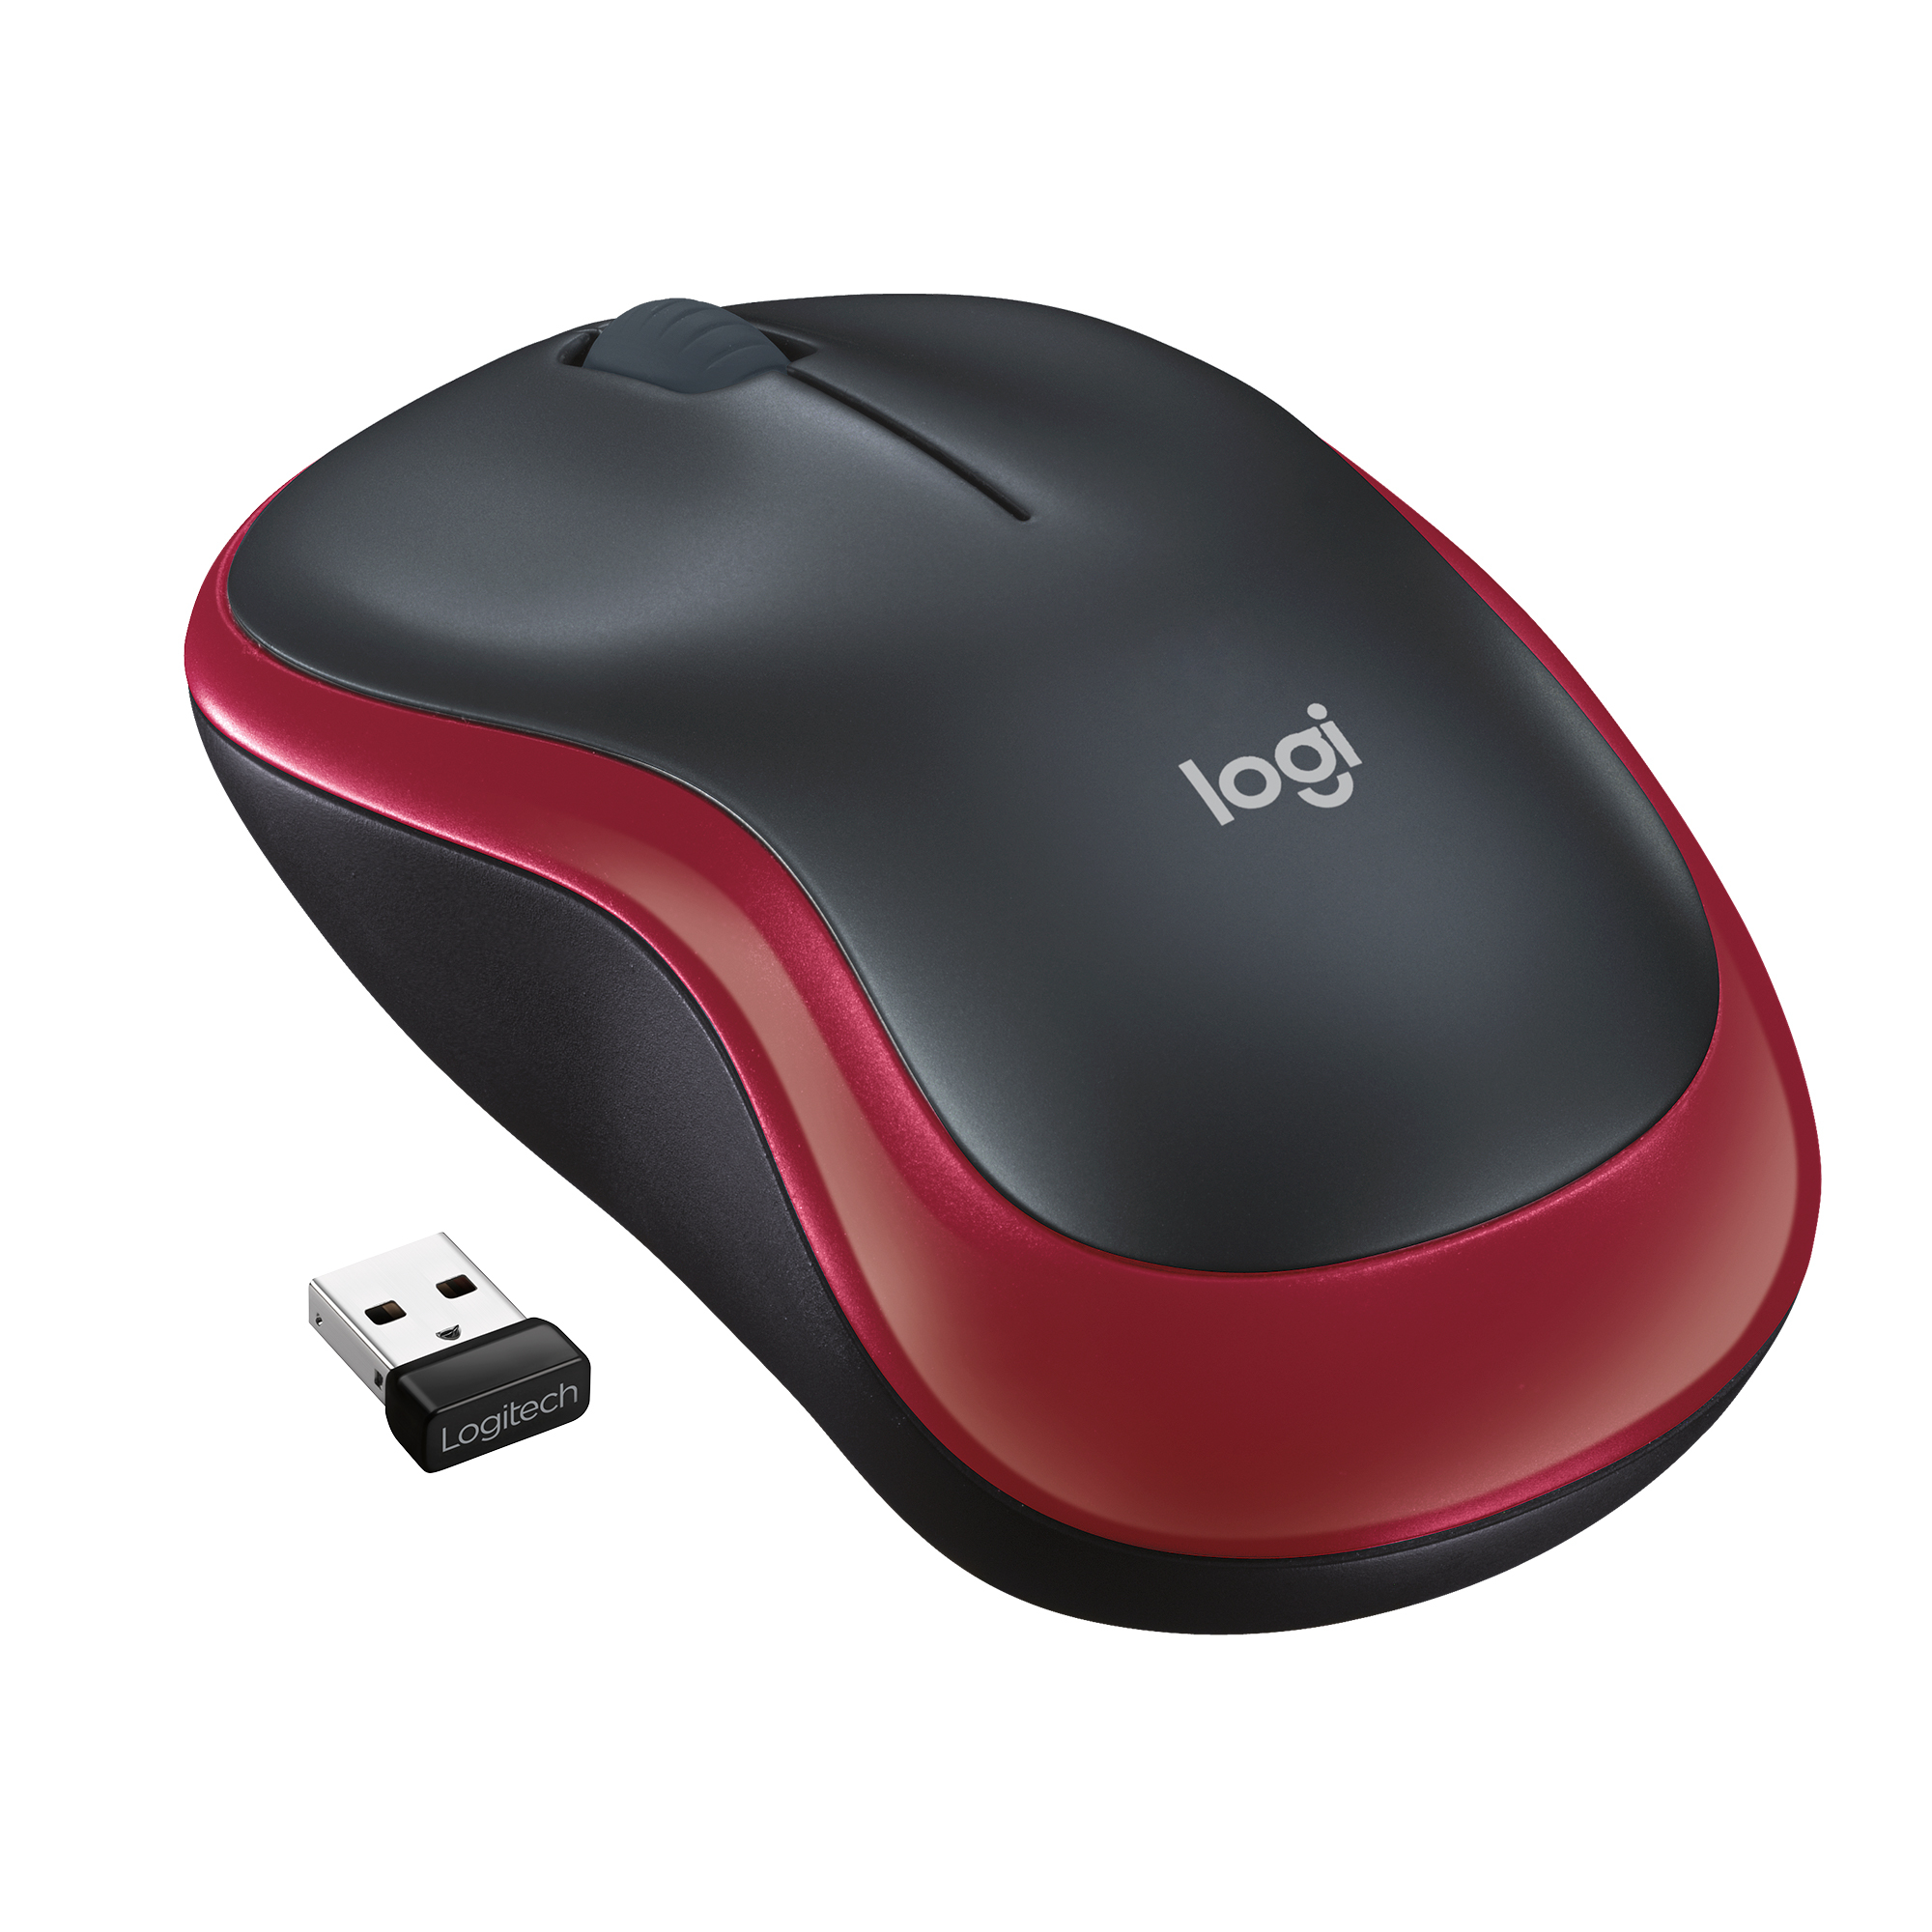 to The resellers Wireless Logitech Mouse stock sell In Stock Channel distributor/wholesale M185, 35 for in -